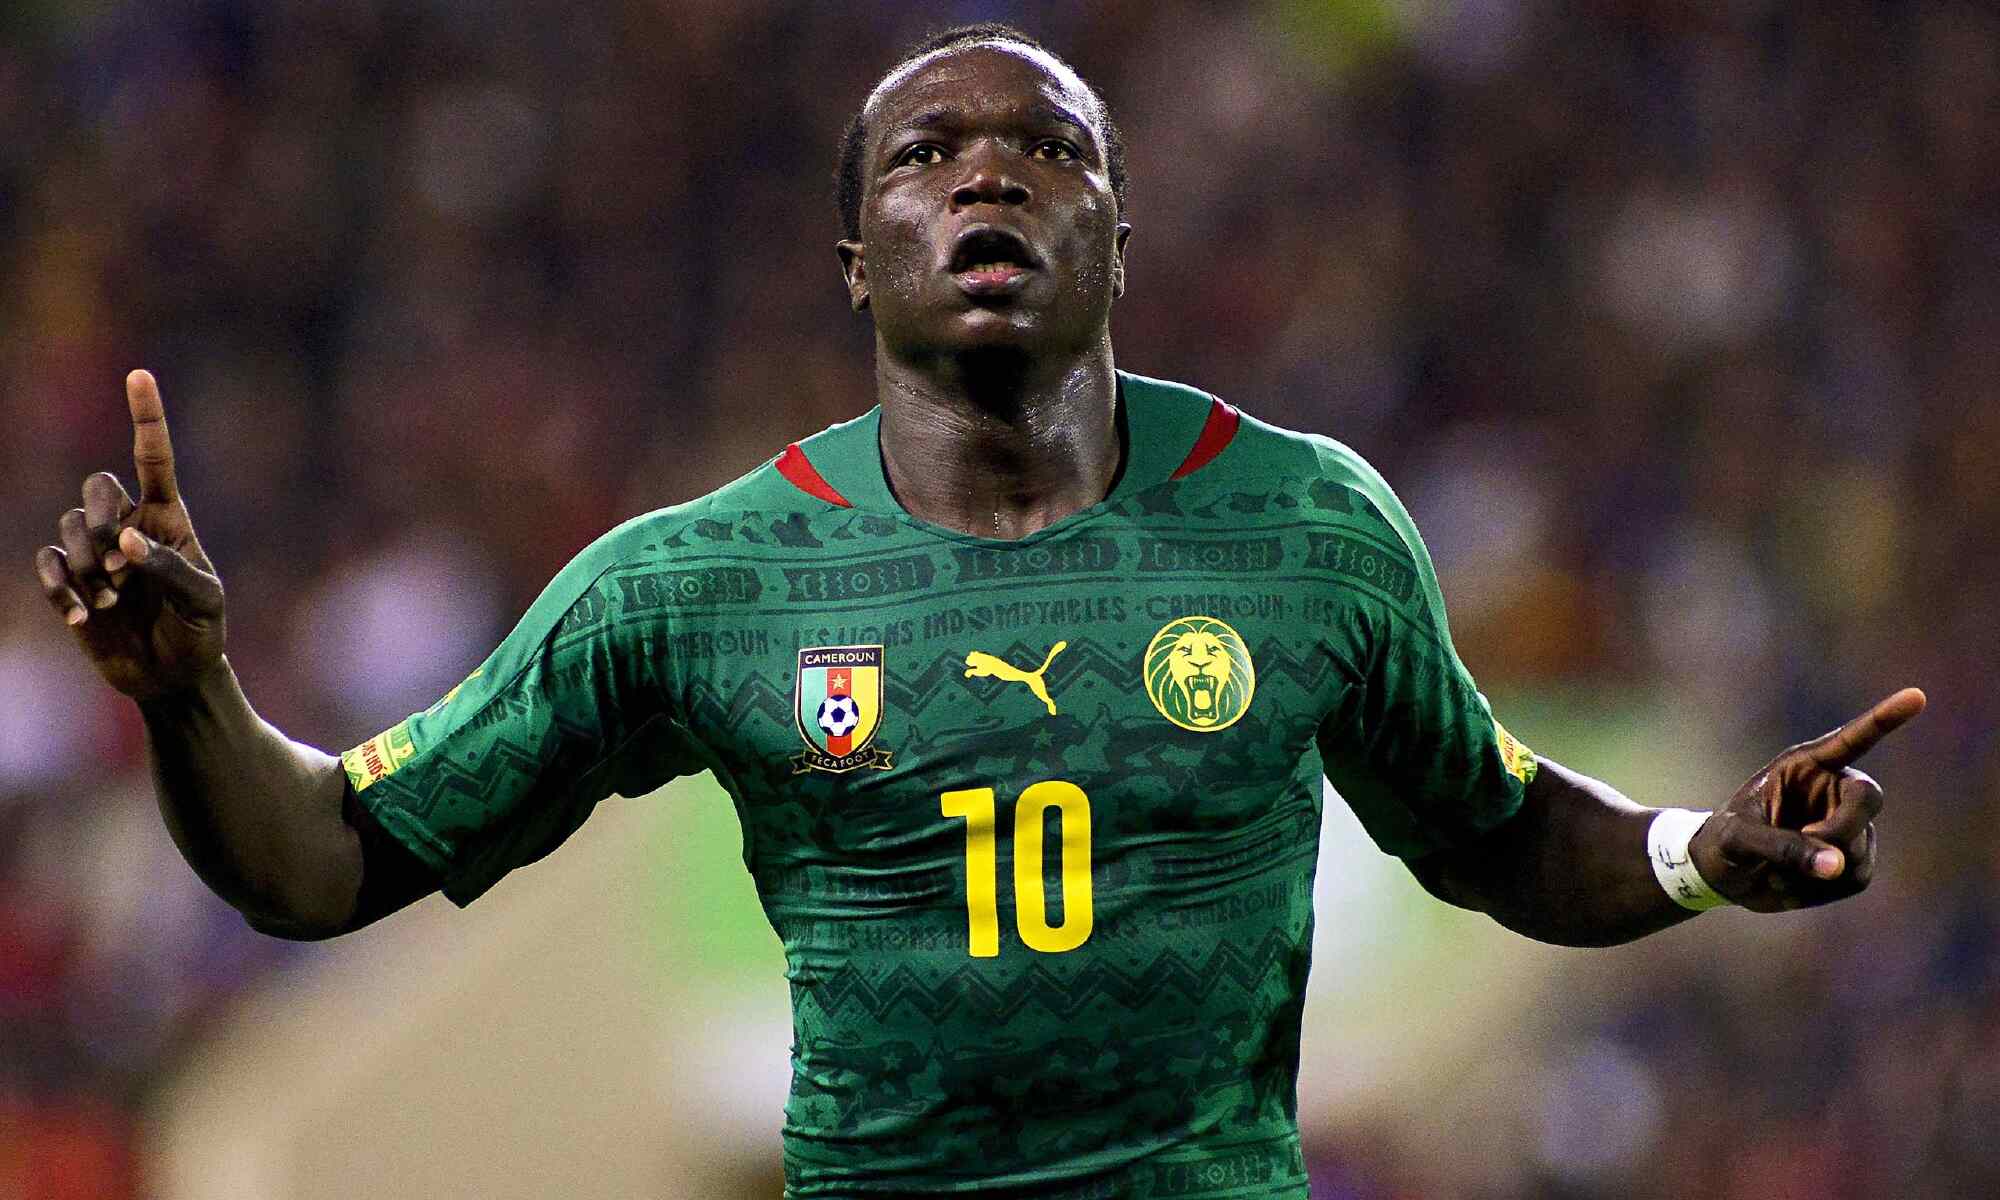 Cameroon's World Cup star Vincent Aboubakar released as Cristiano Ronaldo is registered as Al-Nassr player